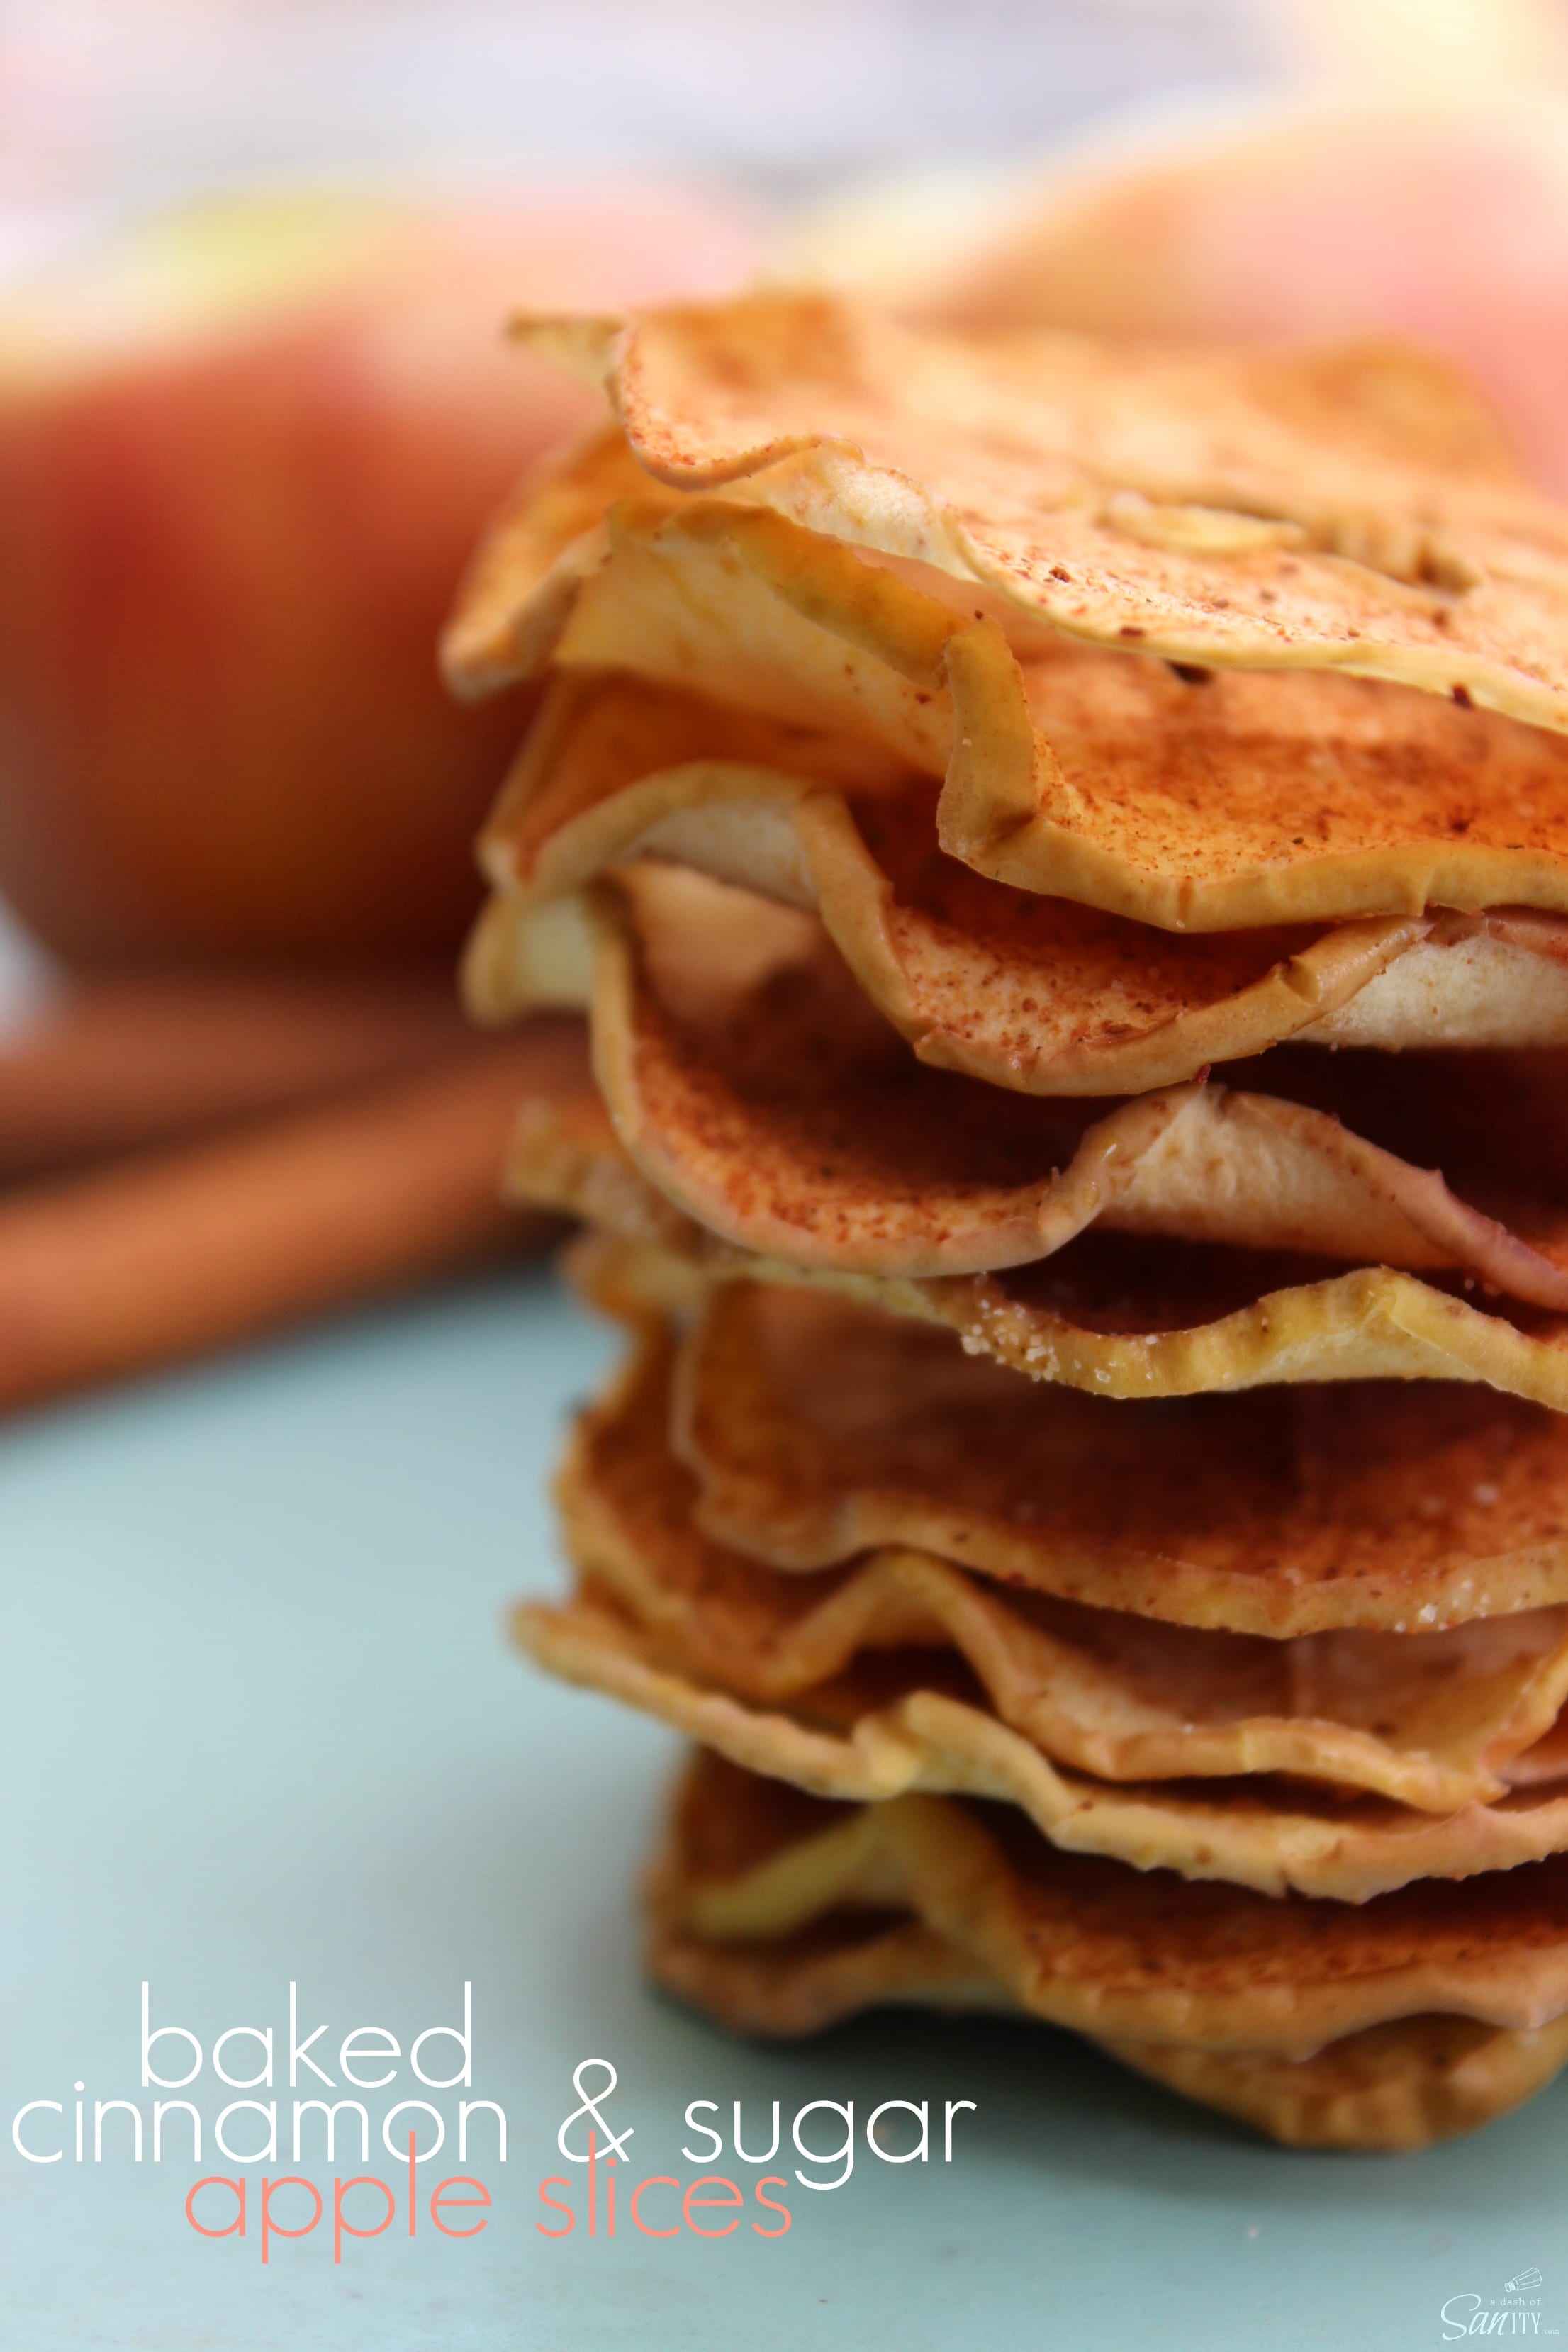 Baked Cinnamon Sugar Apple Slices - healthy, crispy and easy to pack in a lunchbox!